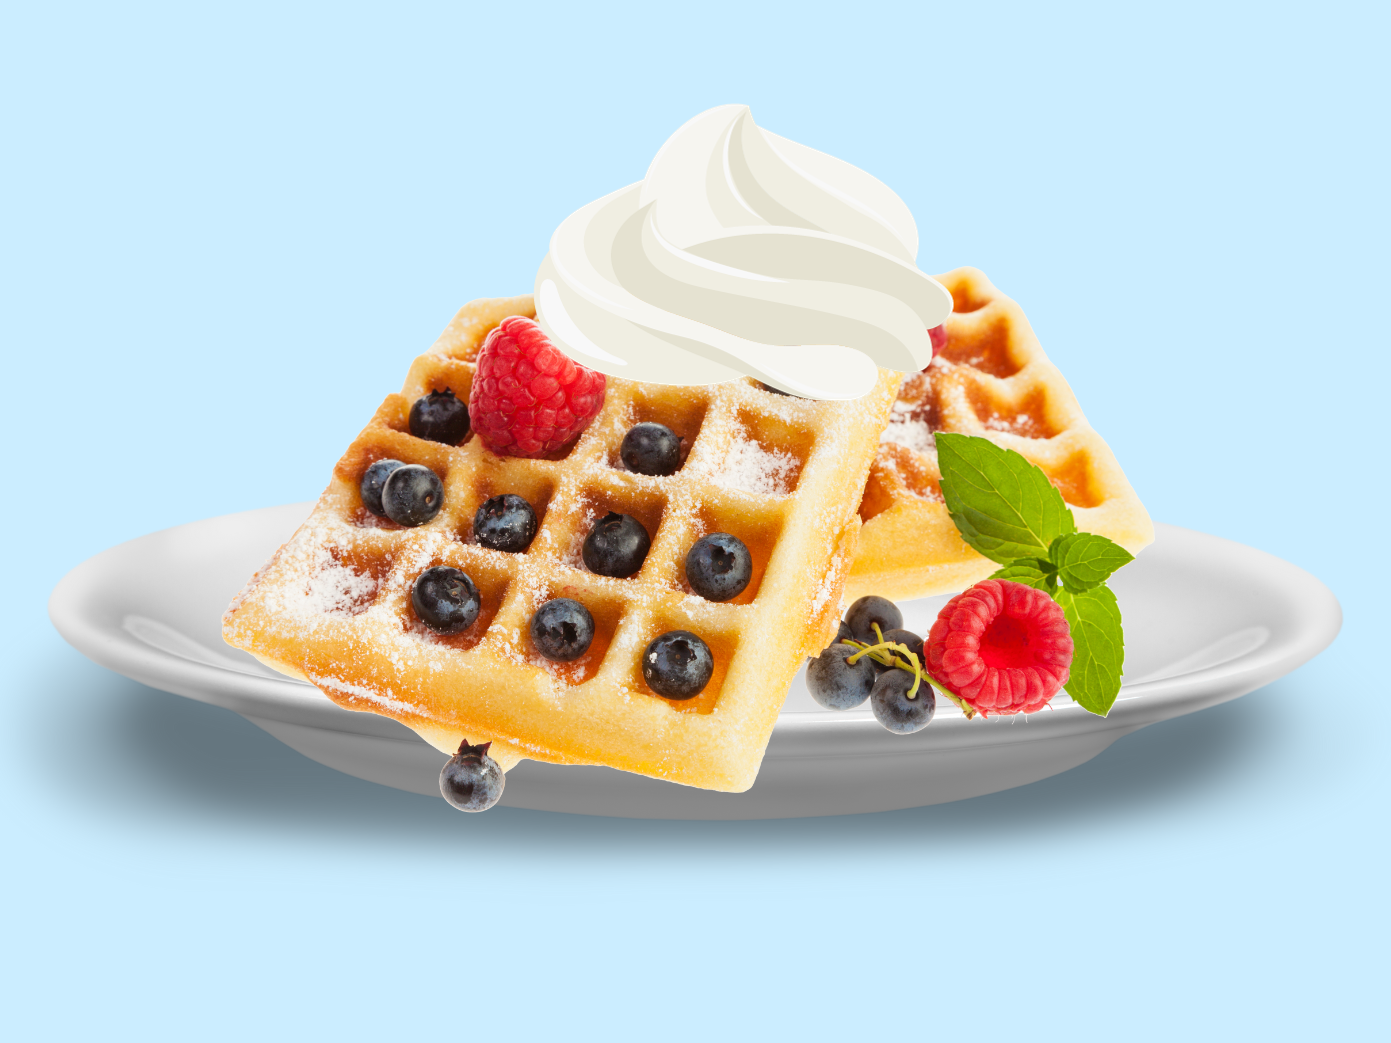 Picture of waffles with berries and whipped cream on top.